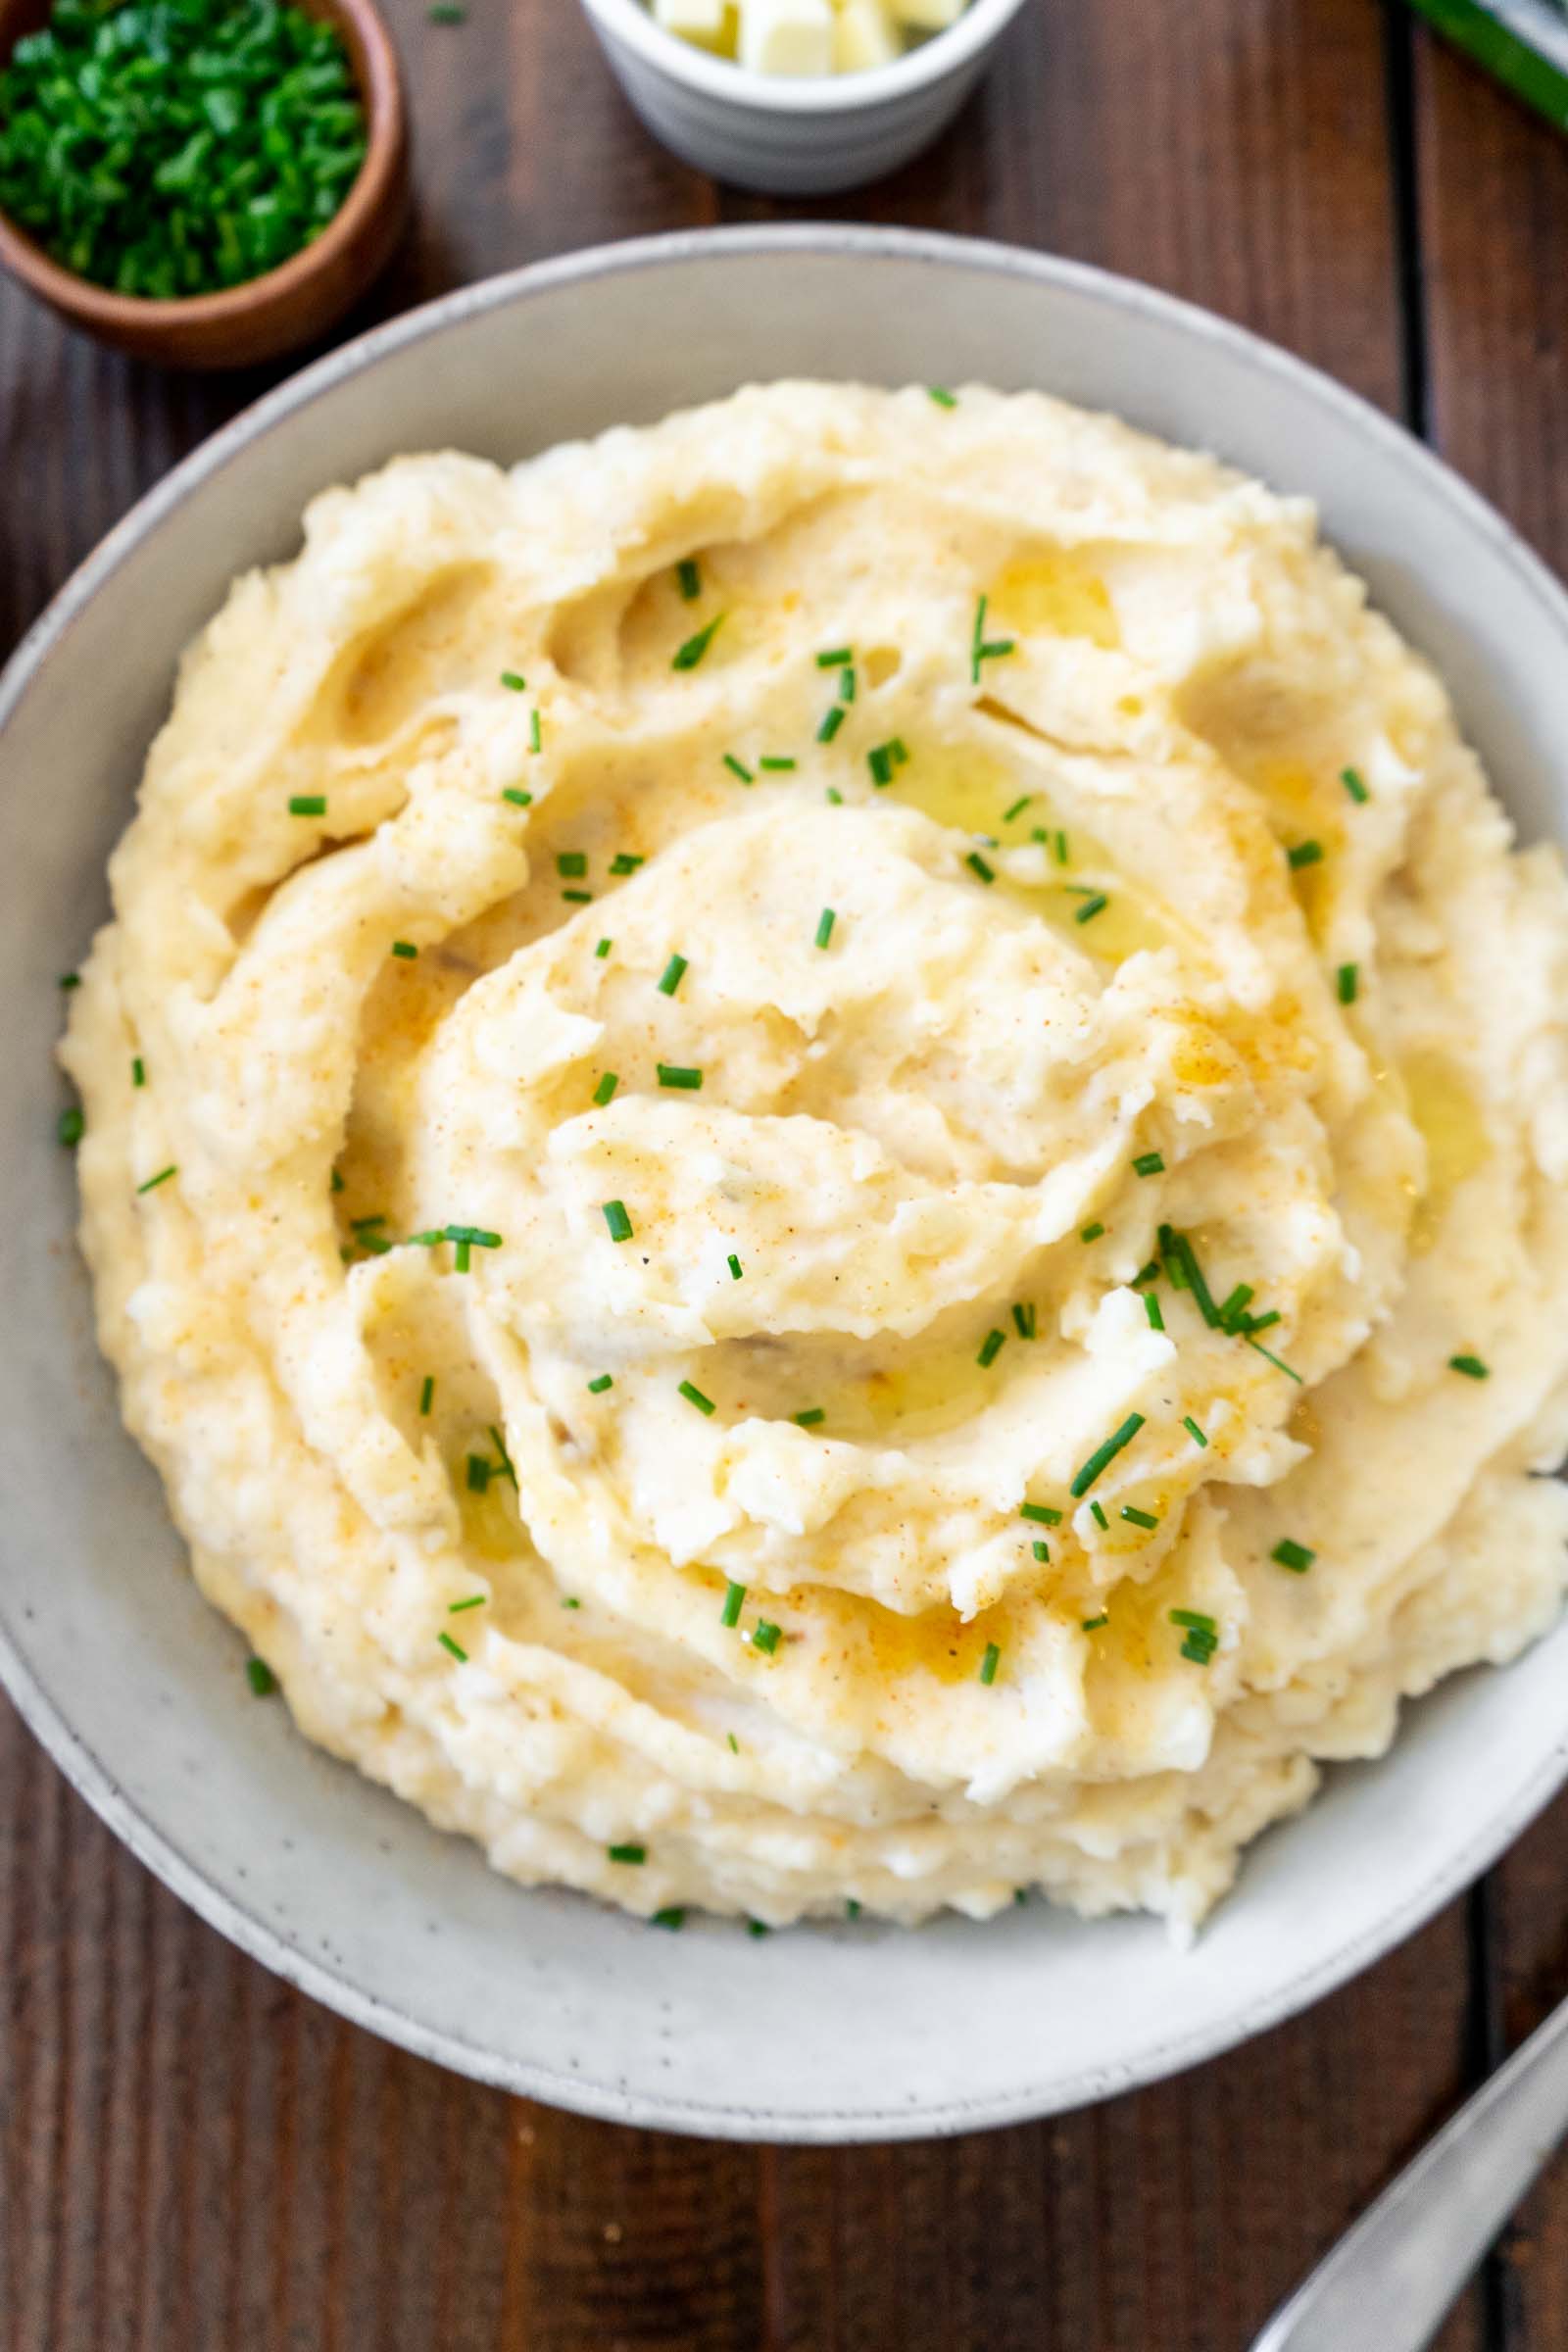 Mashed potatoes and gravy in a bowl sprinkled with chives.